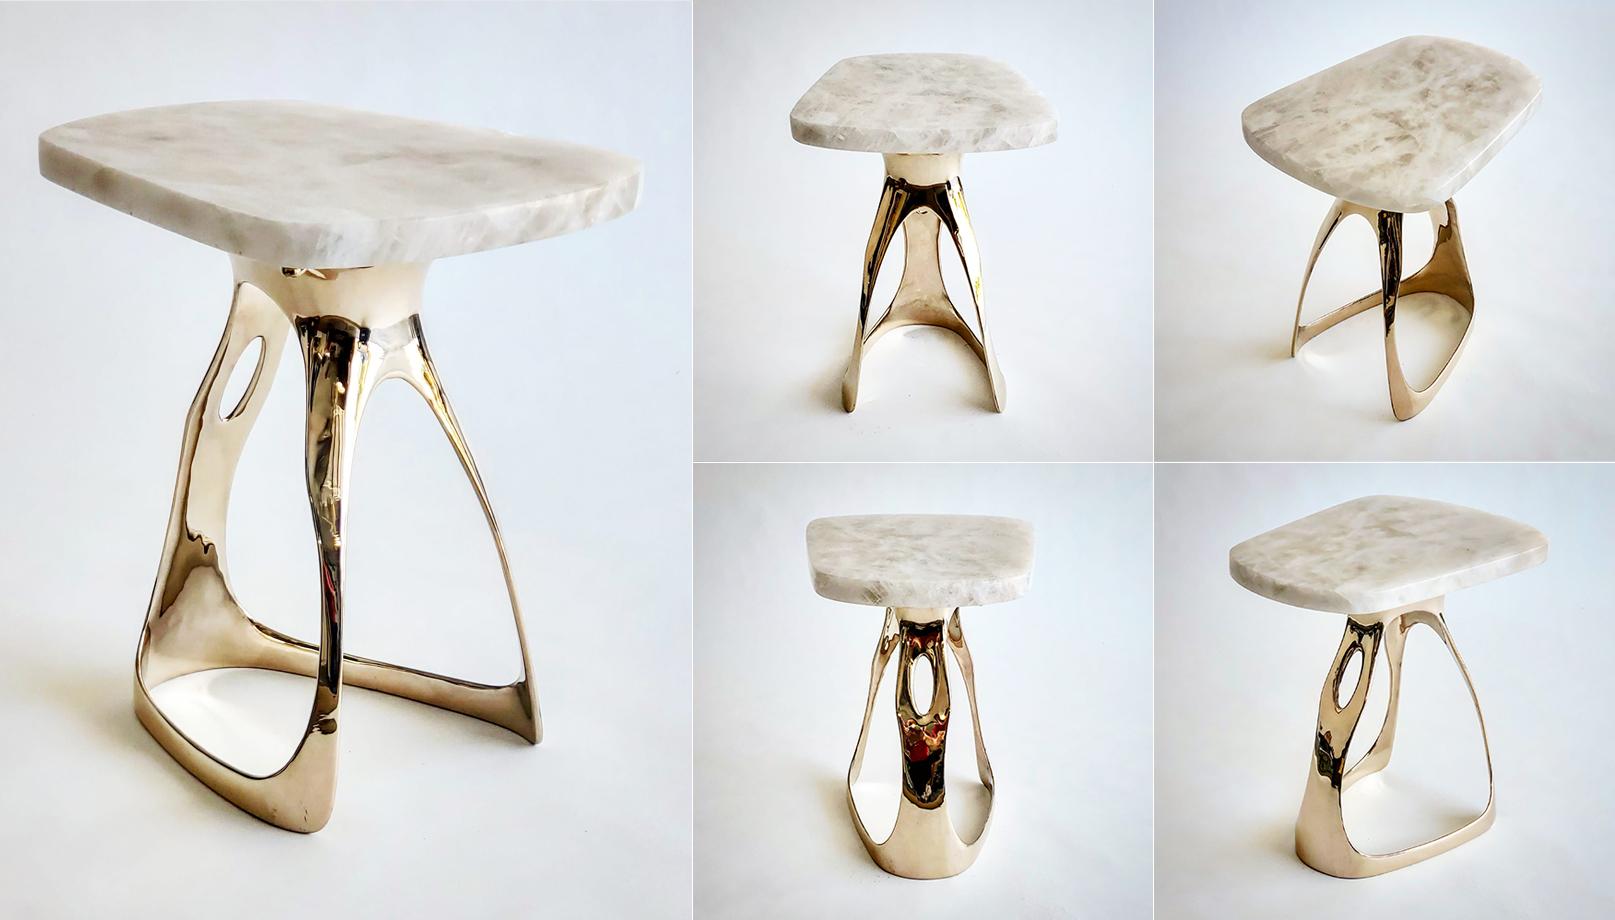 Contemporary Pyra Table - Polished Bronze and Quartzite Top Design by Michael Sean Stolworthy For Sale